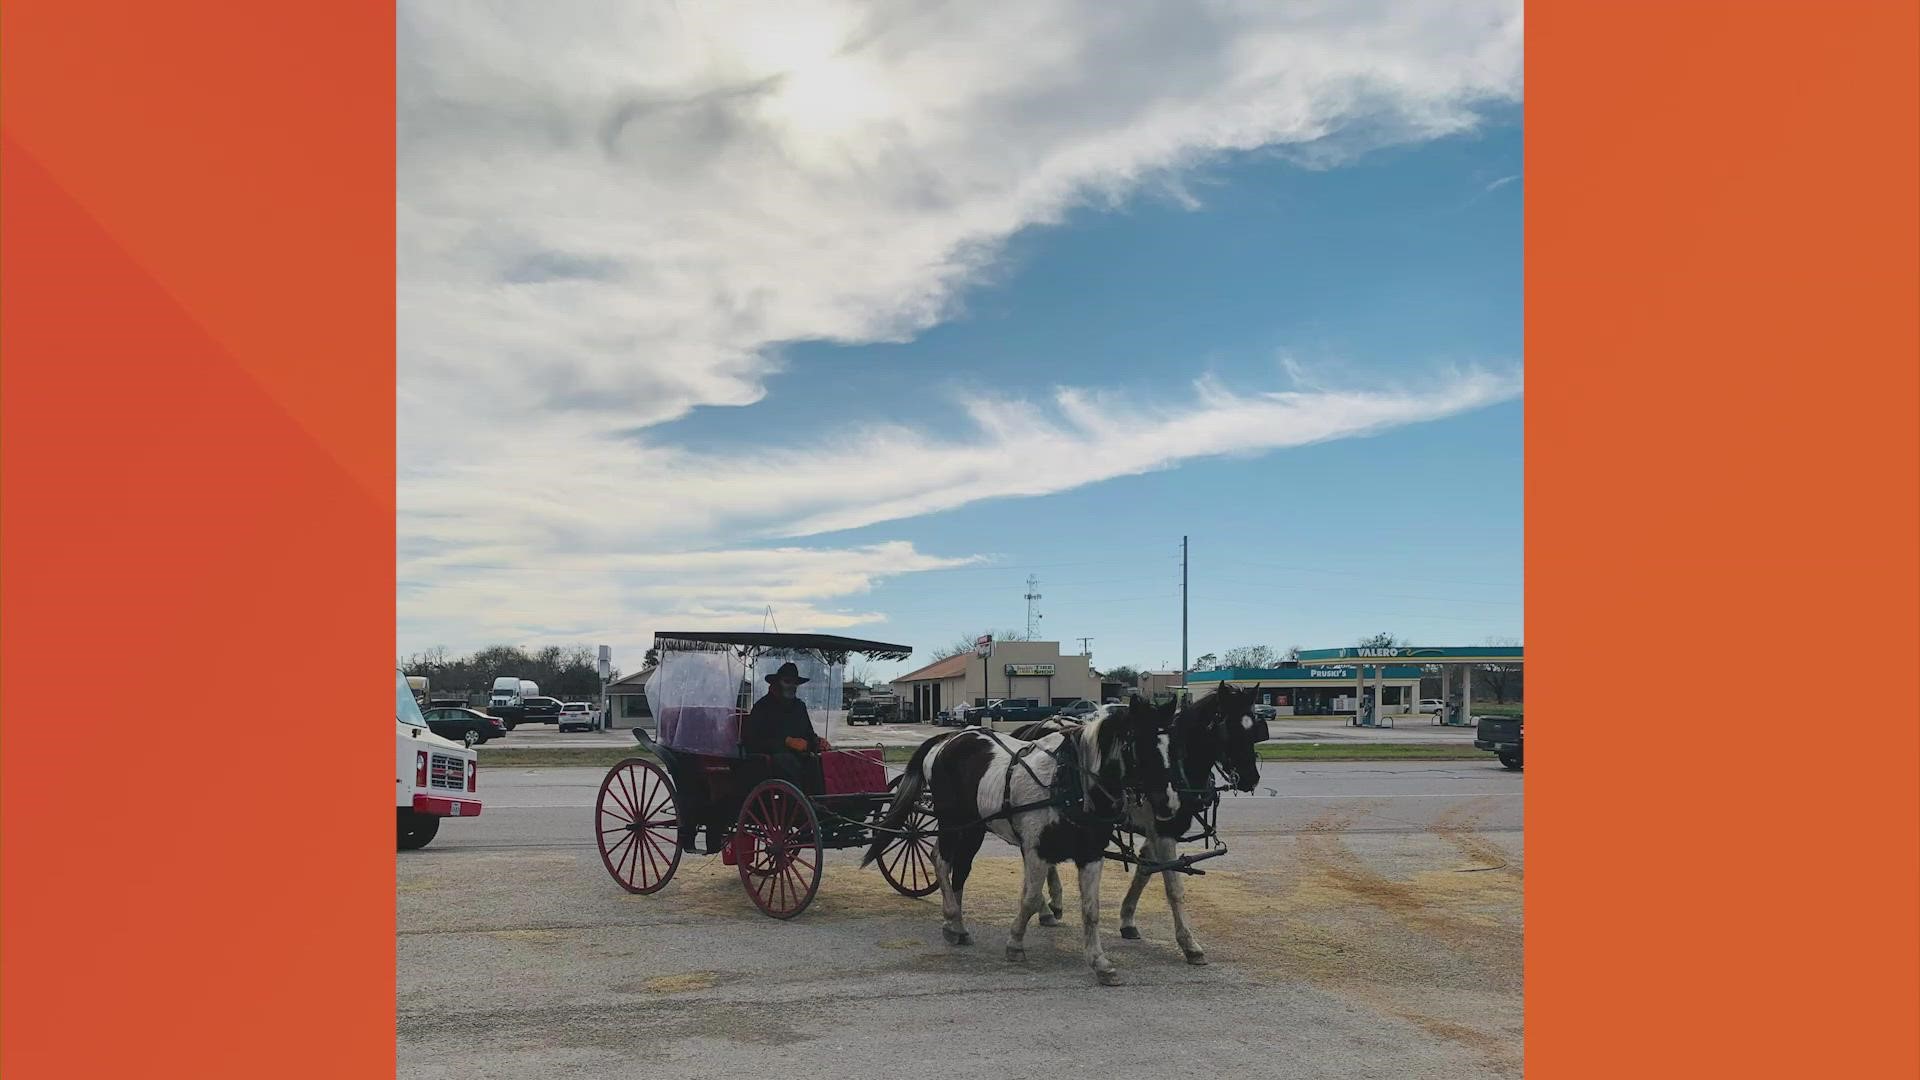 The South Texas Trail Riders are making their way to San Antonio. These are pictures of the group as they pass through Floresville.